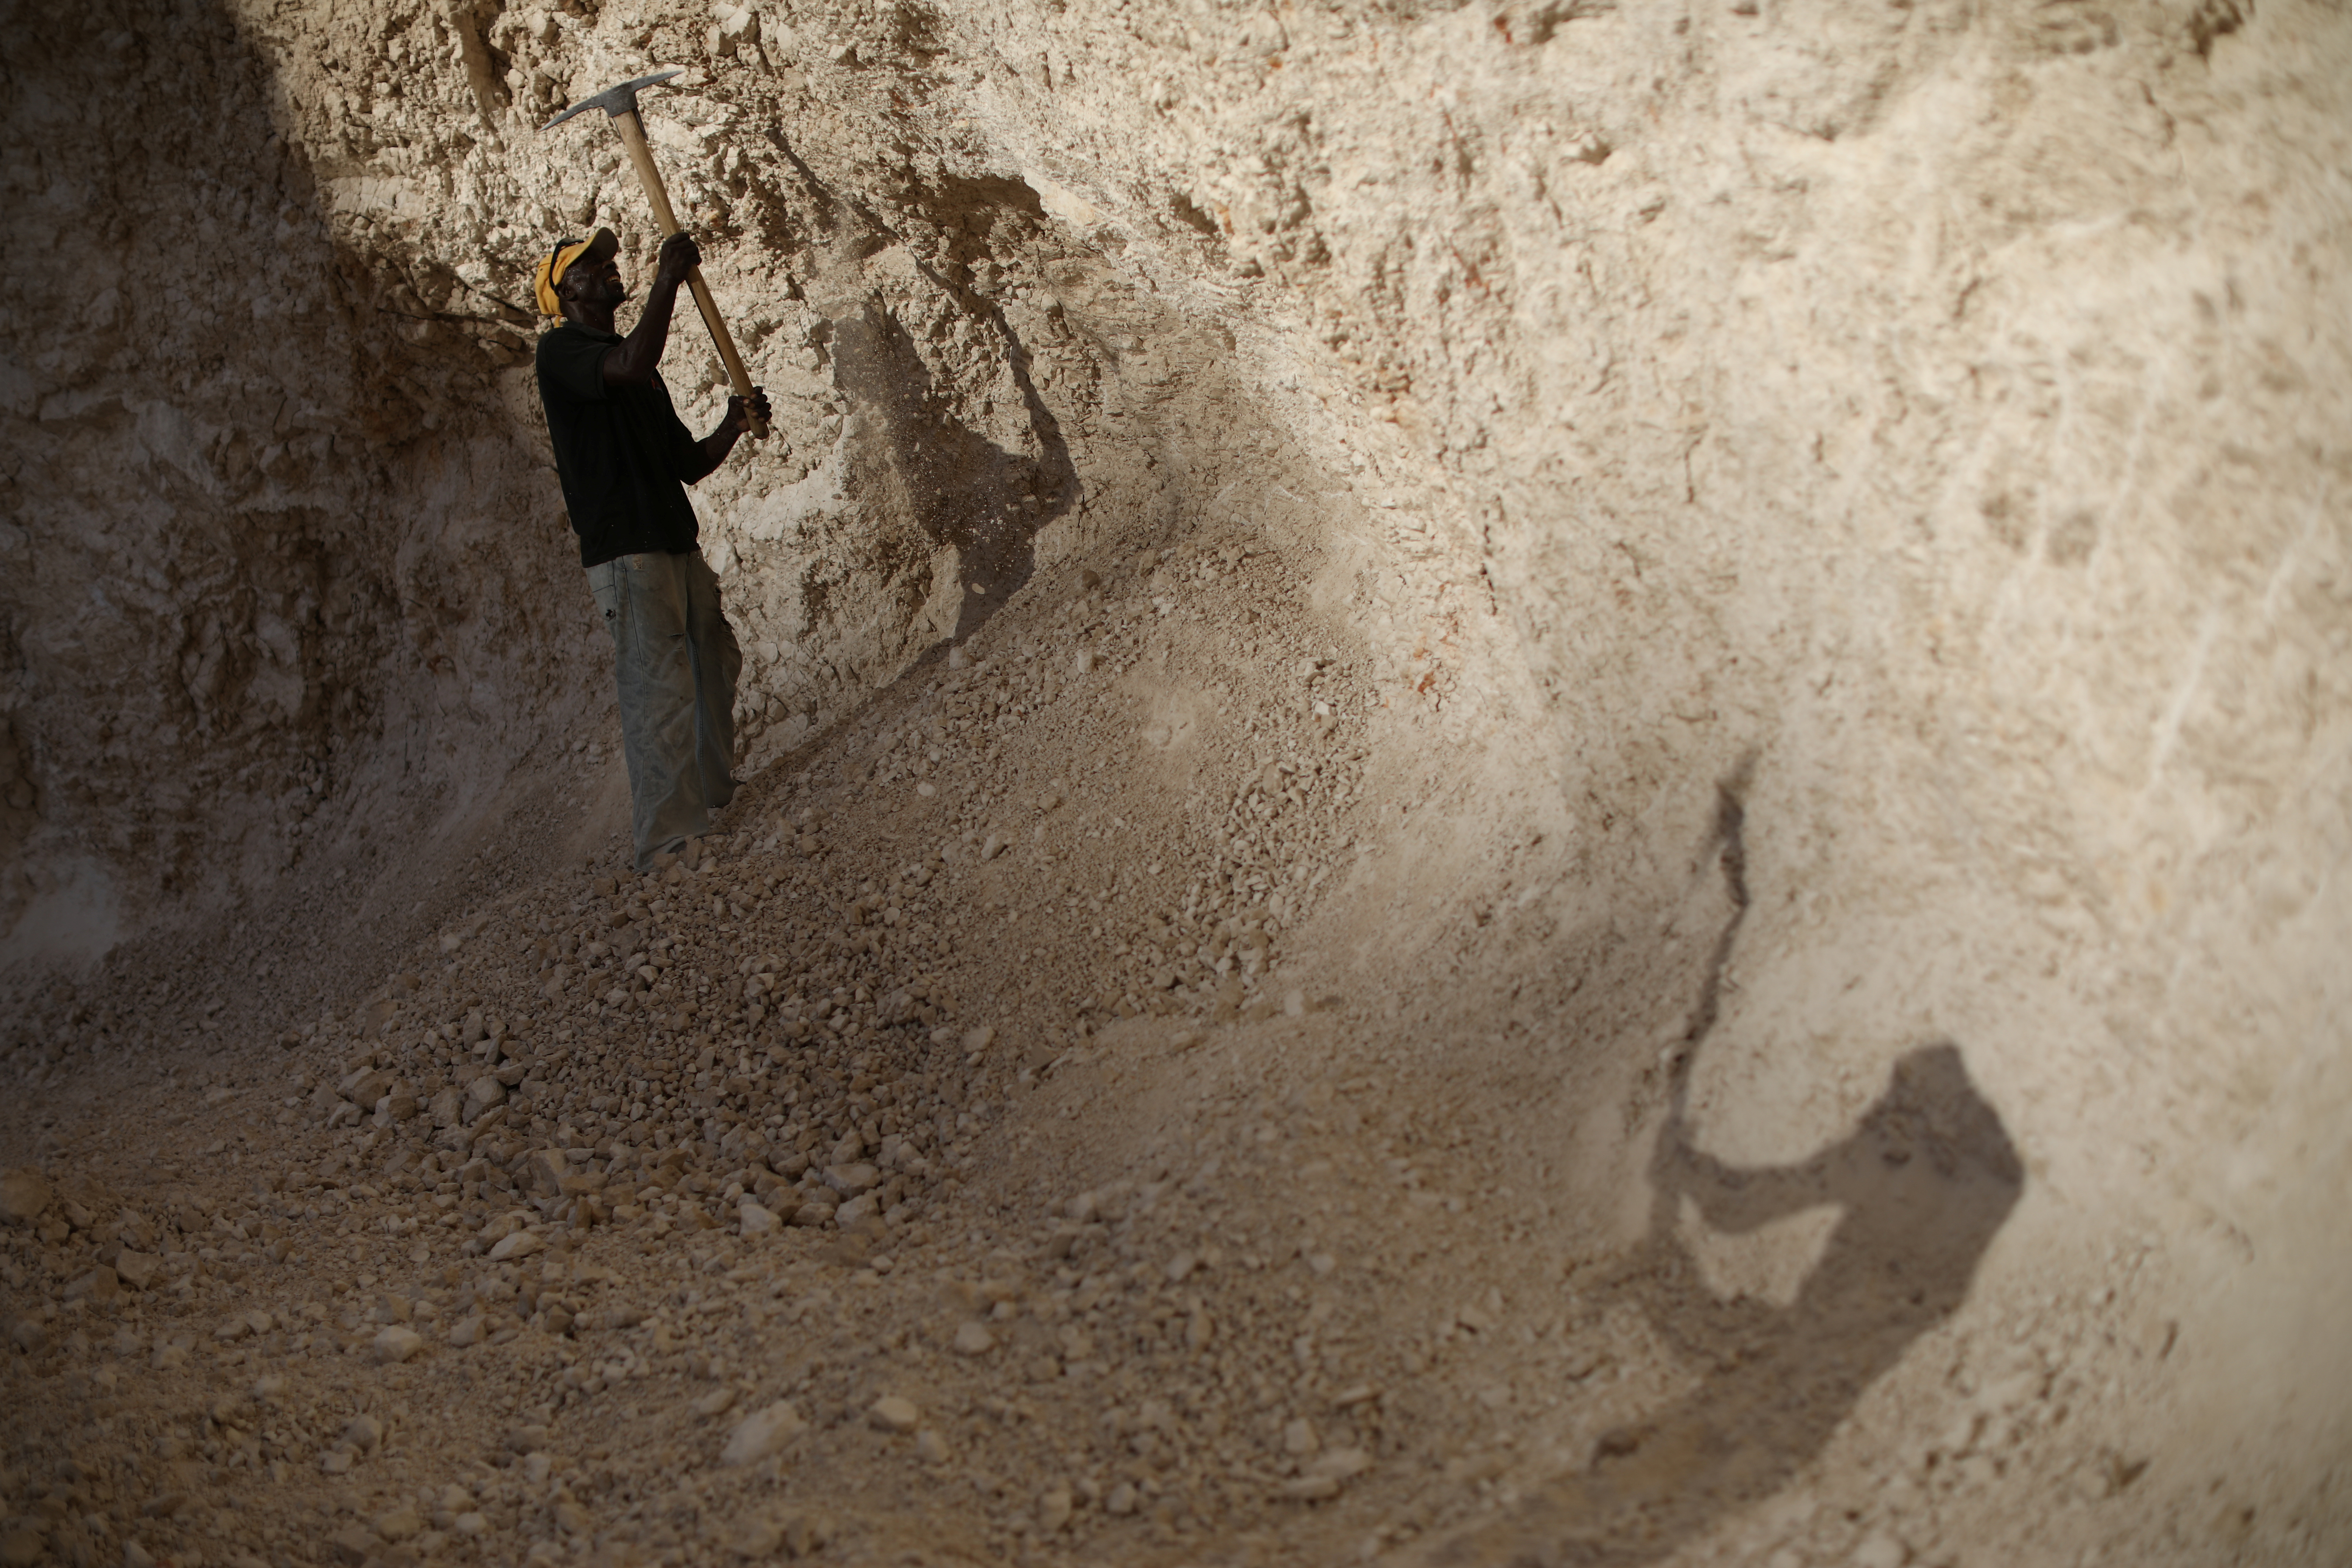 Men use picks to break rocks and get sand in a sand mine on the outskirts of Fond Parisien